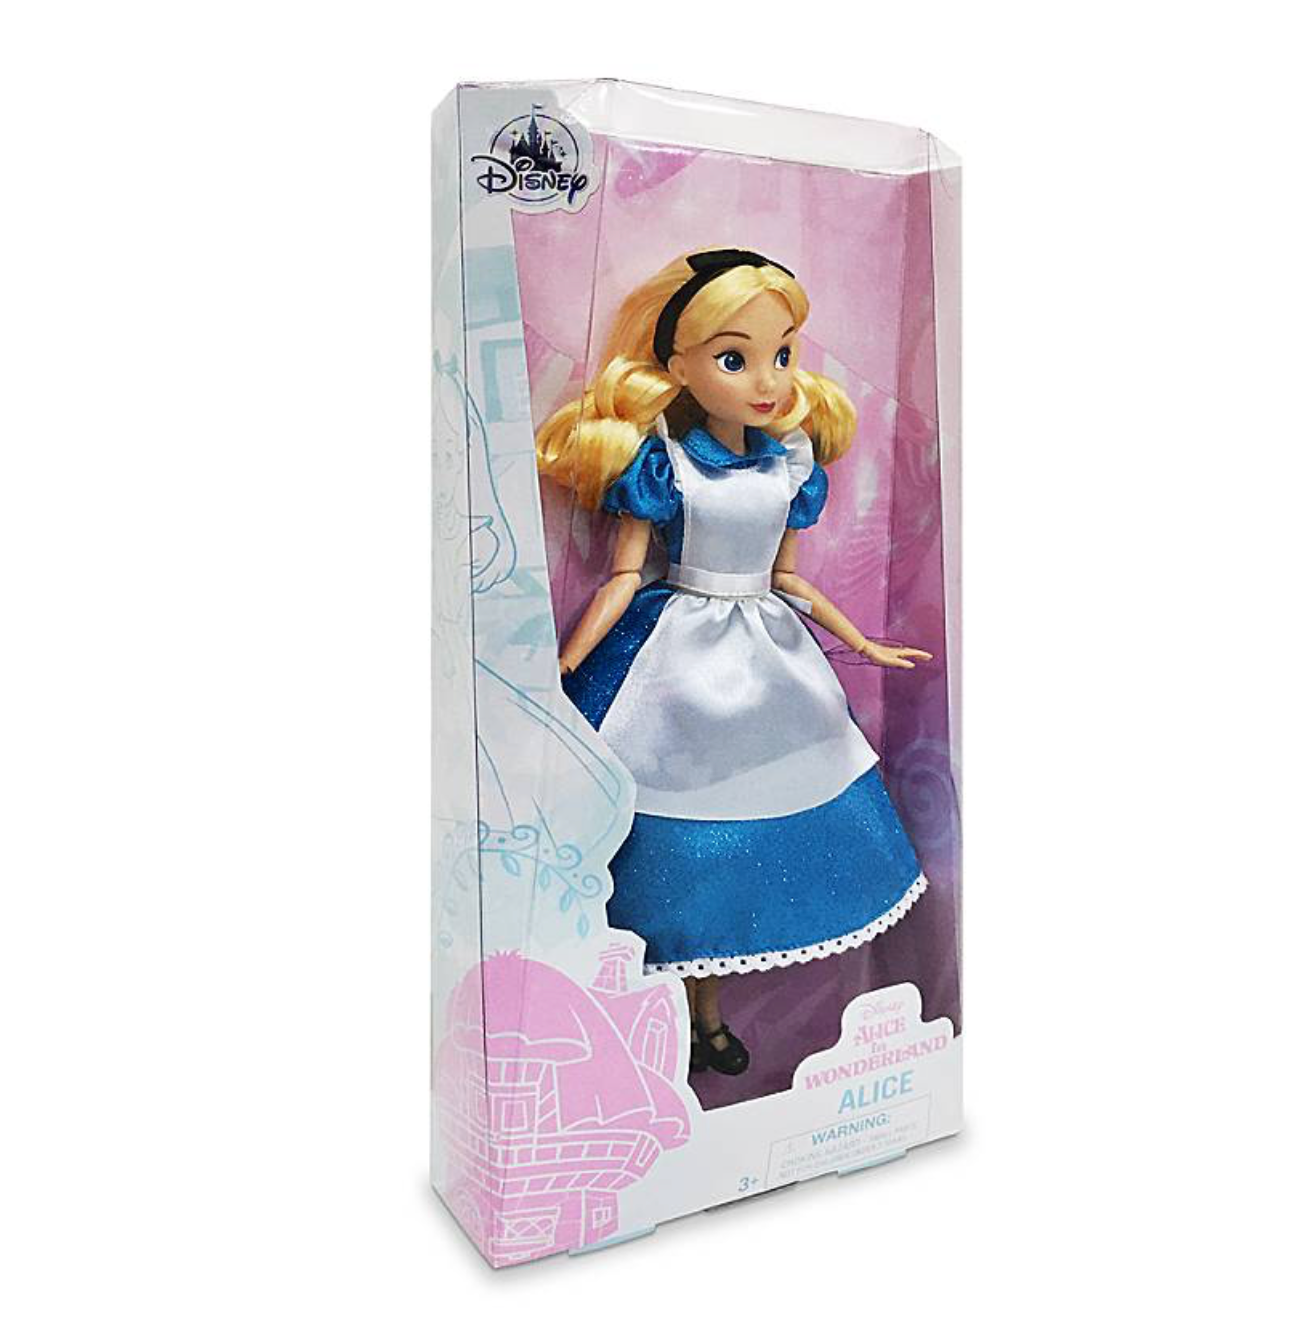 Disney Store Alice in Wonderland Classic Doll New with Box